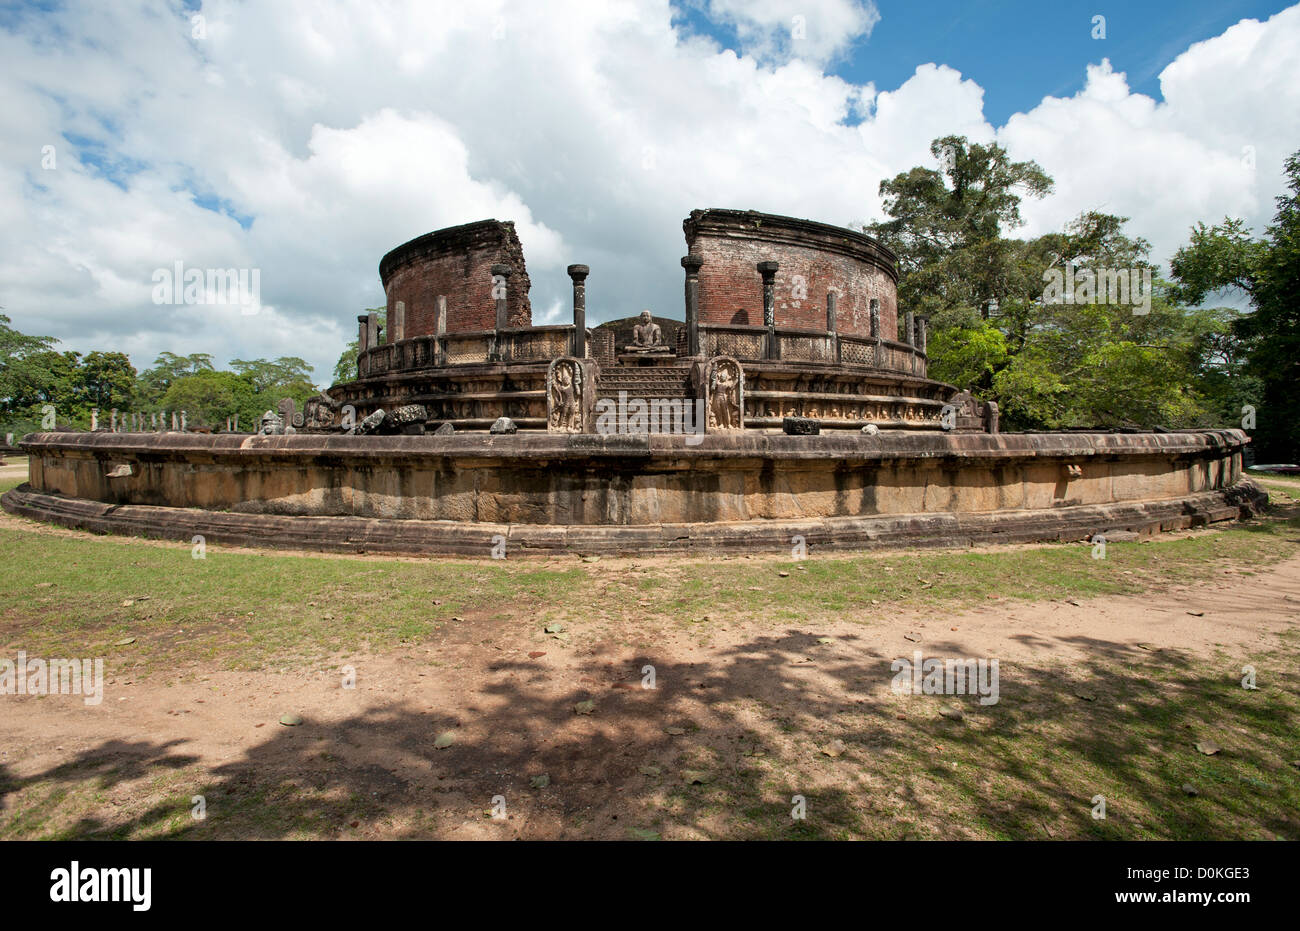 The Vatadage circular relic house a stone carved building at the ancient city of Polonnaruwa Sri Lanka Stock Photo